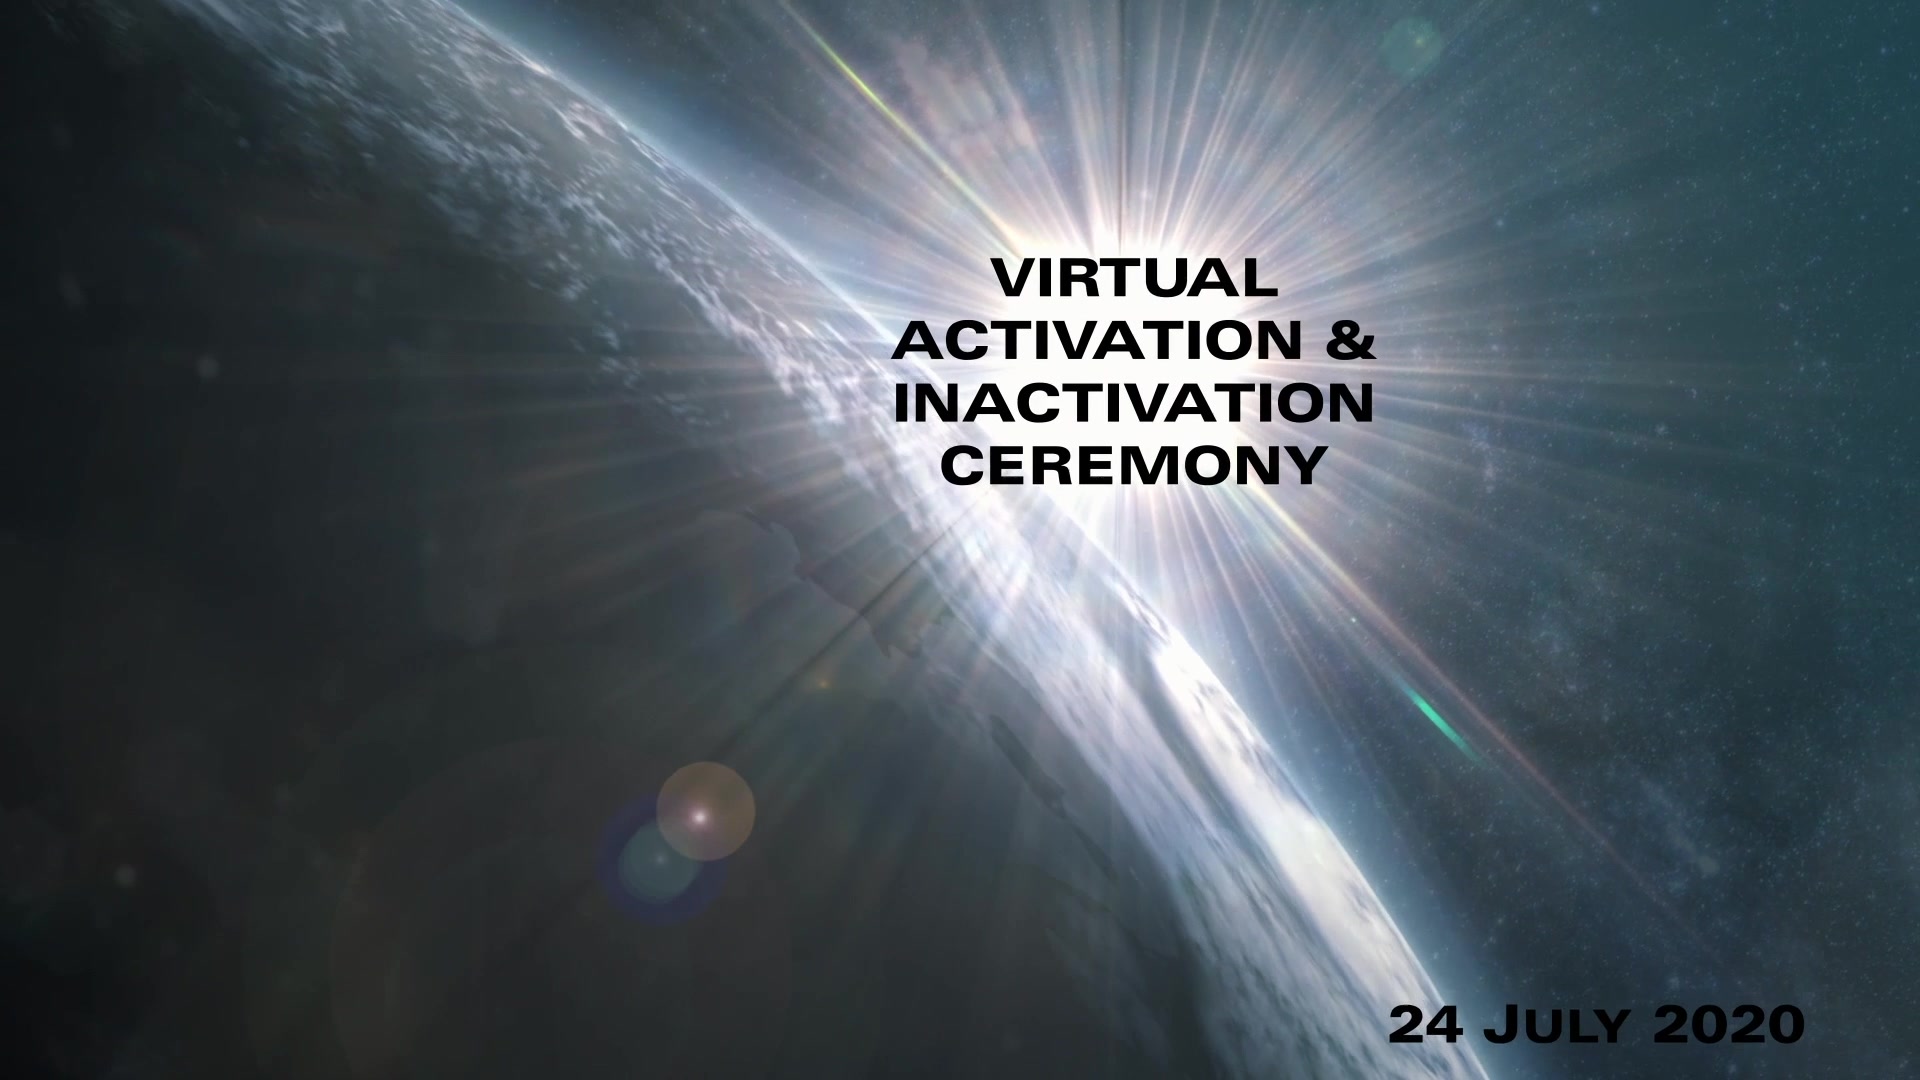 A historic virtual ceremony activating U.S. Space Force units and deactivating legacy U.S. Air Force units featuring remarks by USSF Chief of Space Operations Gen. Jay Raymond, premiered on July 24th, 2020.